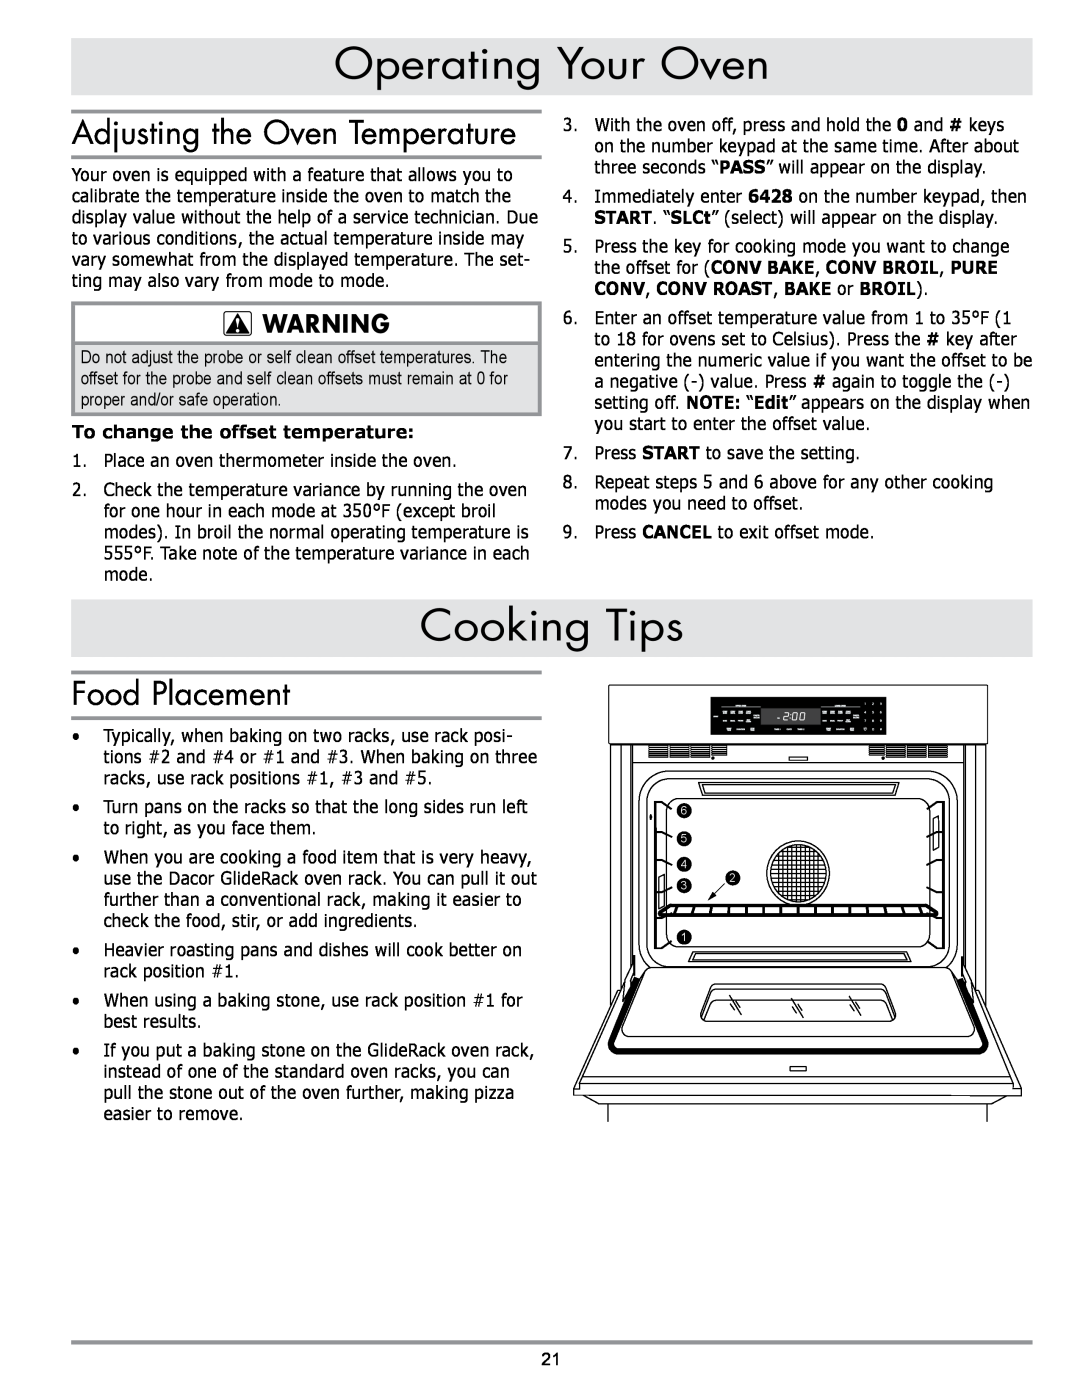 Sears EORD230 manual Cooking Tips, Adjusting the Oven Temperature, Food Placement, To change the offset temperature 